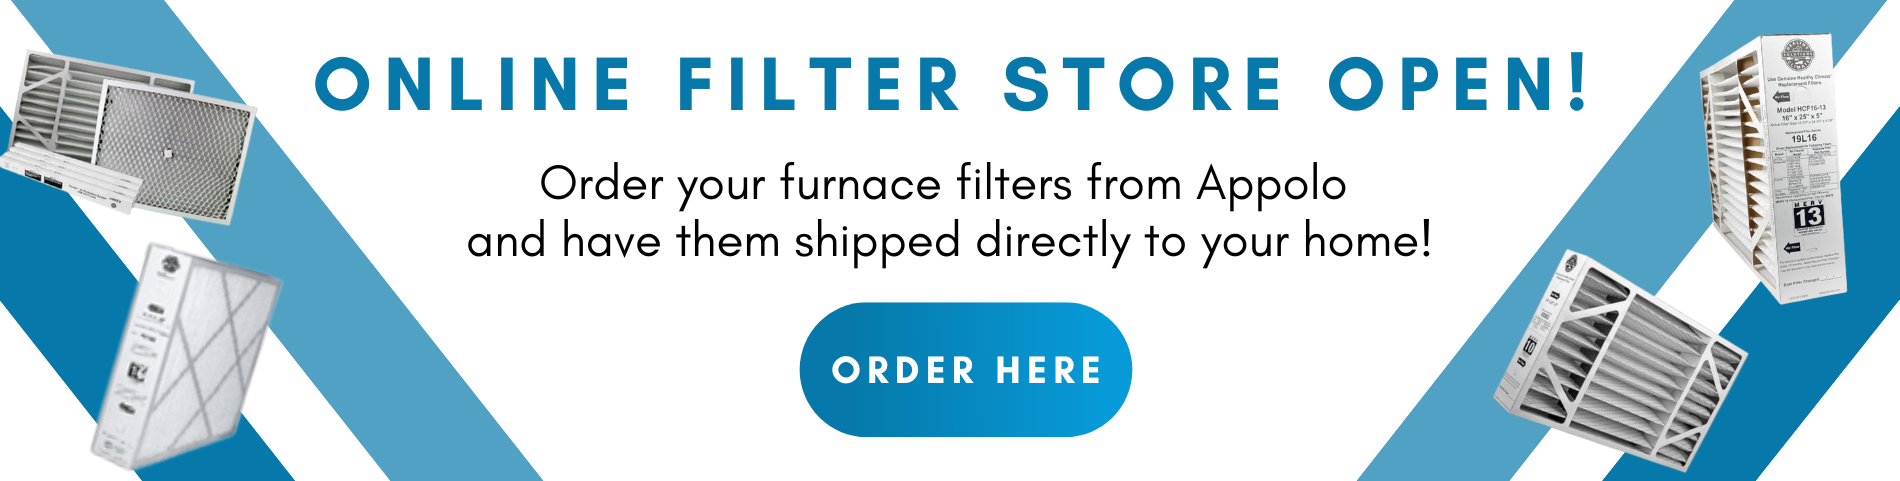 Filter Store Now Open